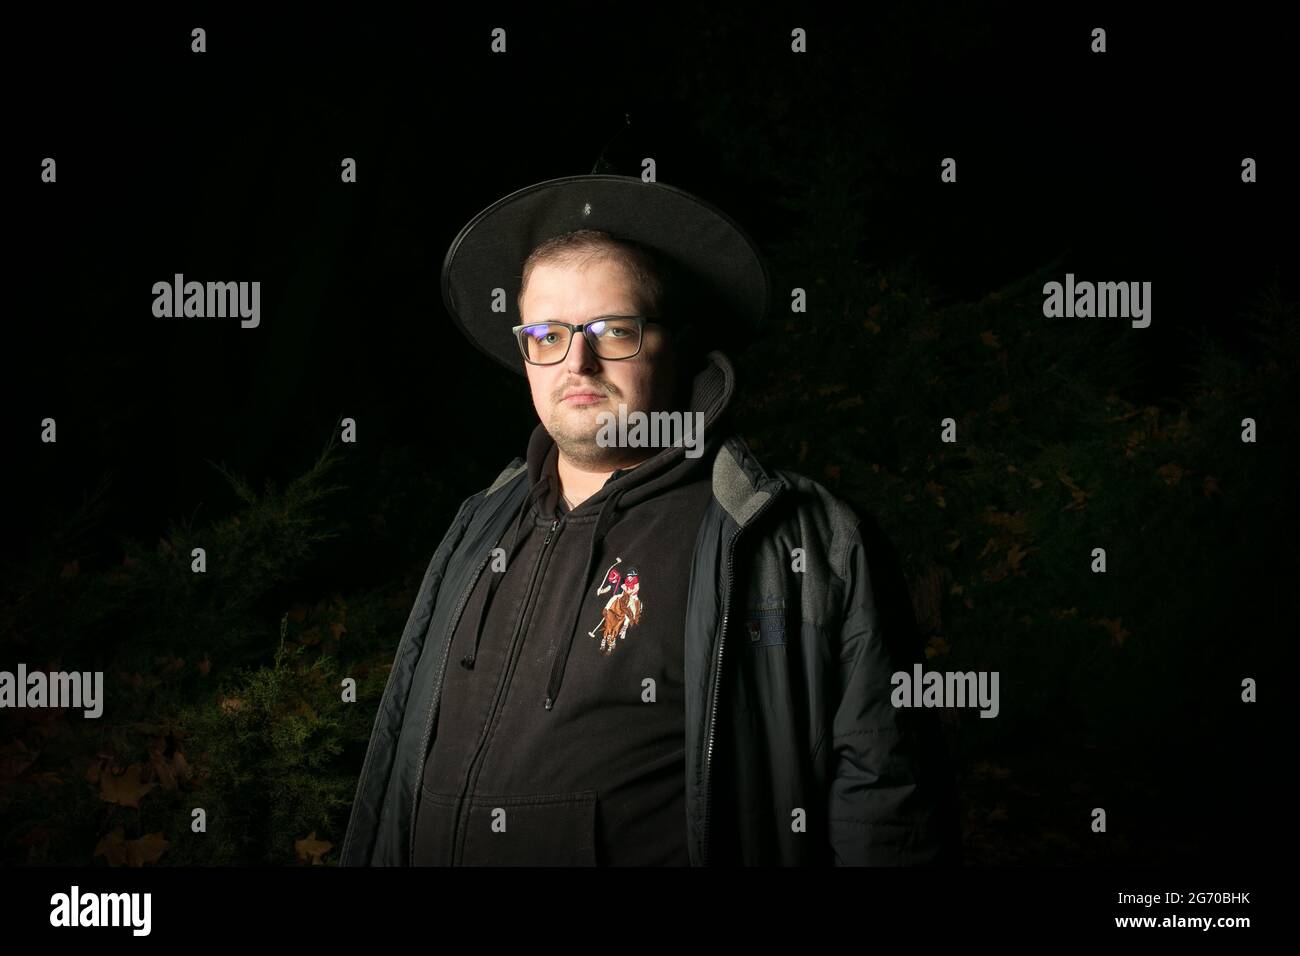 Portrait of a man with glasses in a wizard's cap. Halloween is coming. Stock Photo